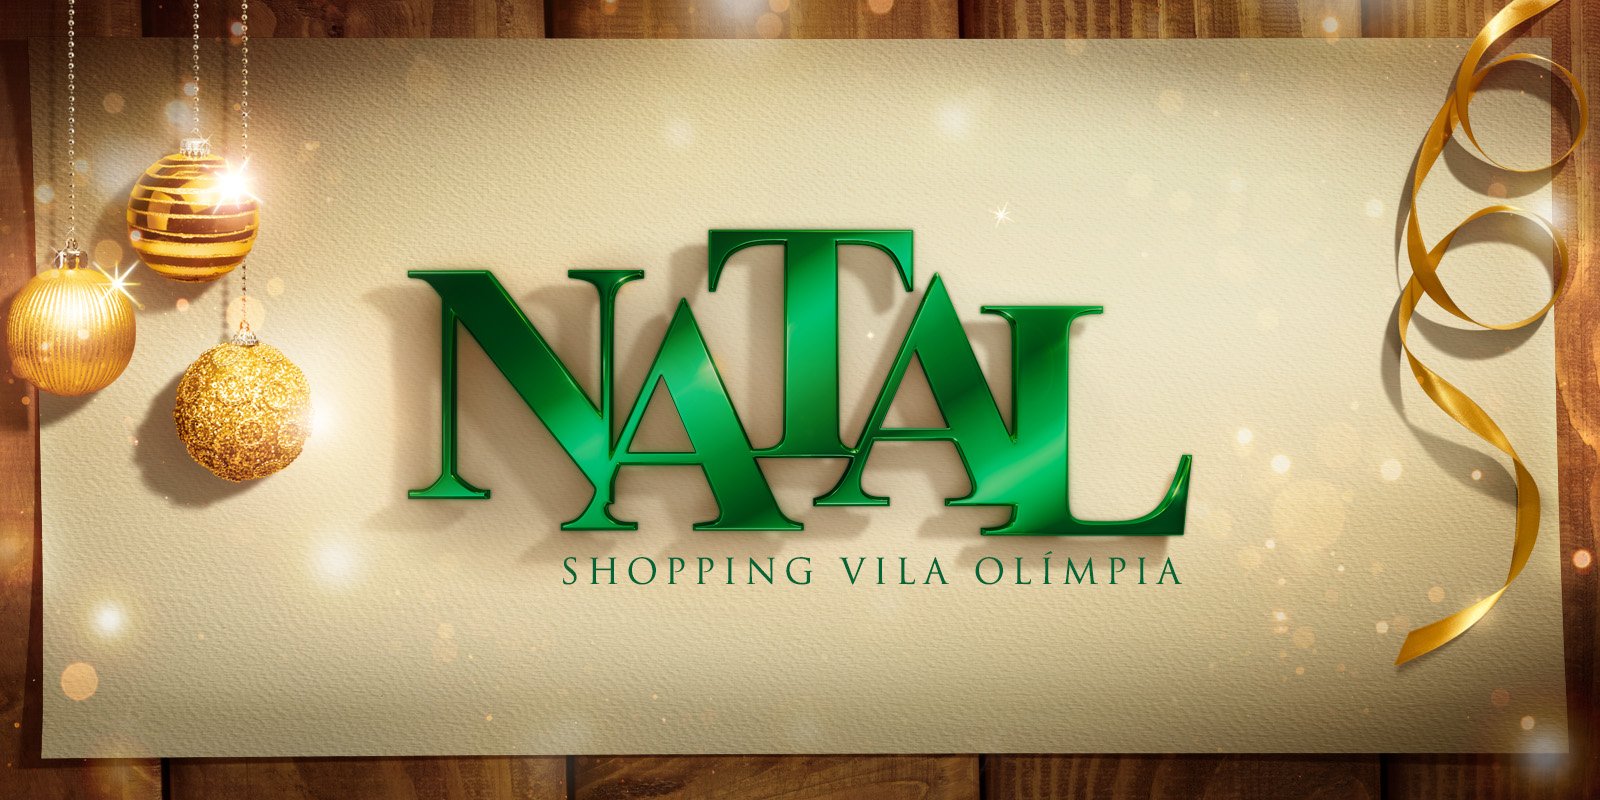 Featured image for “Natal do Shopping Vila Olímpia”